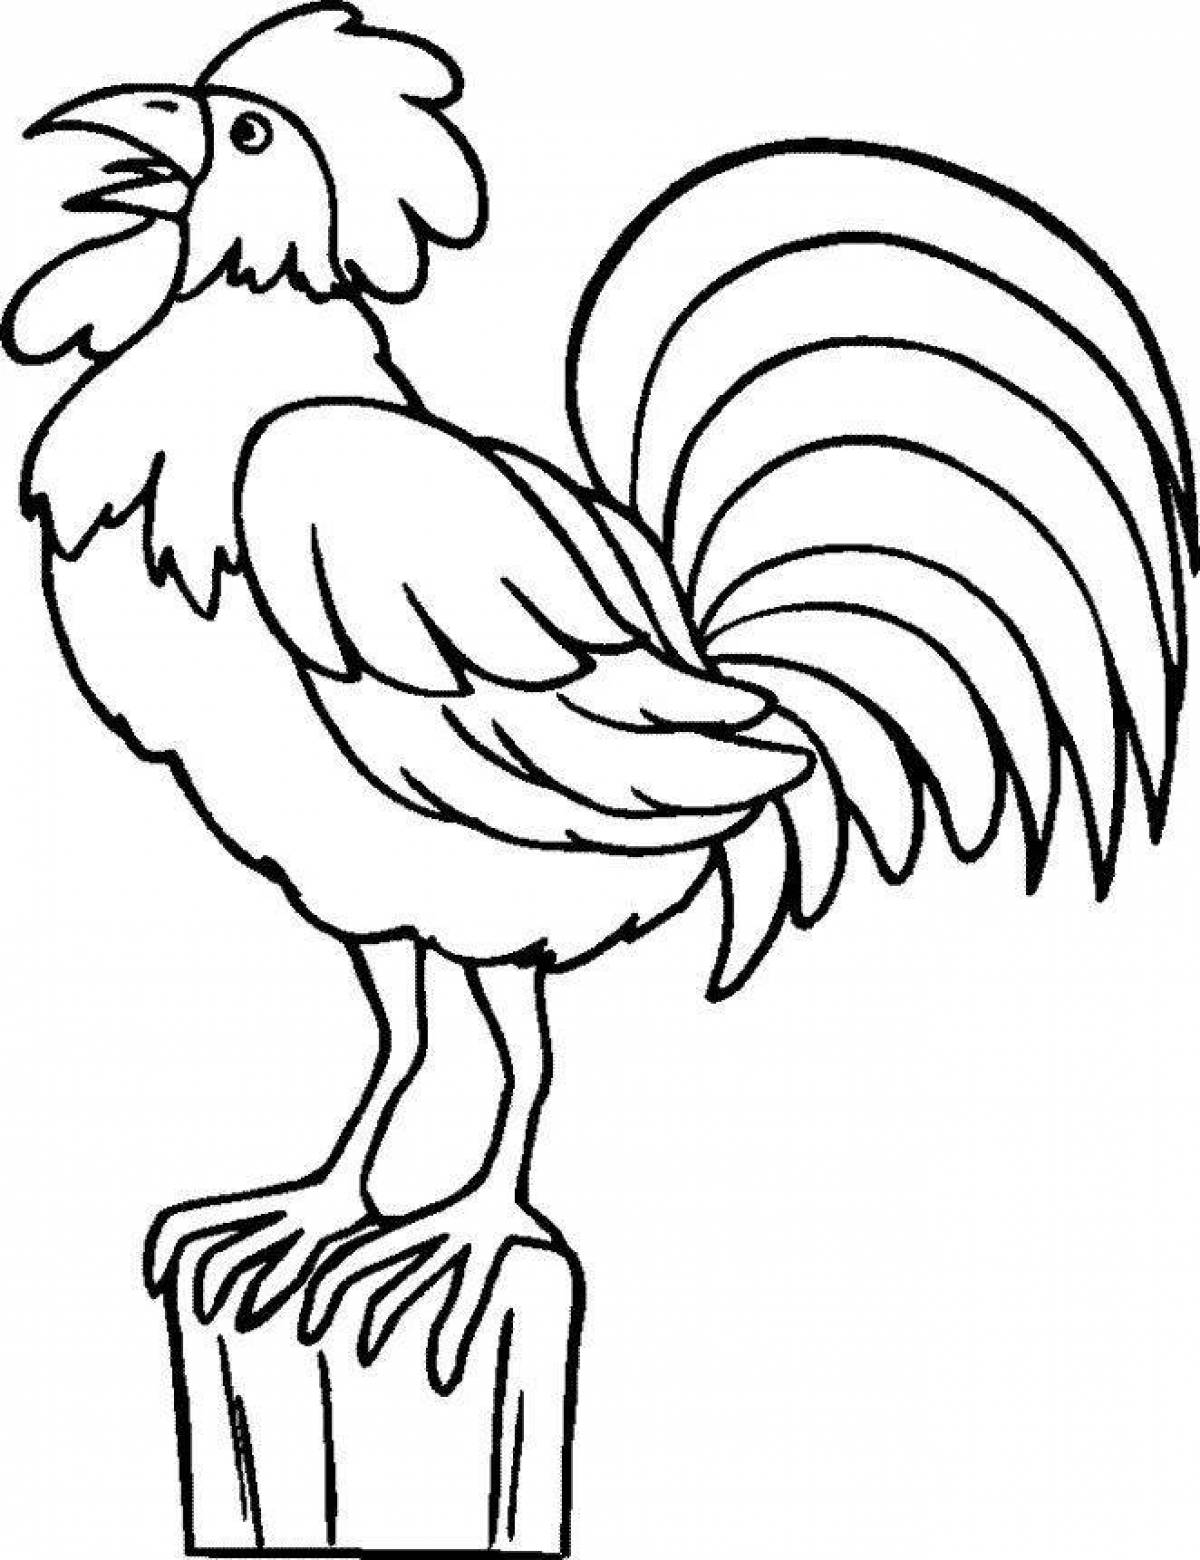 Cute rooster coloring pages for kids